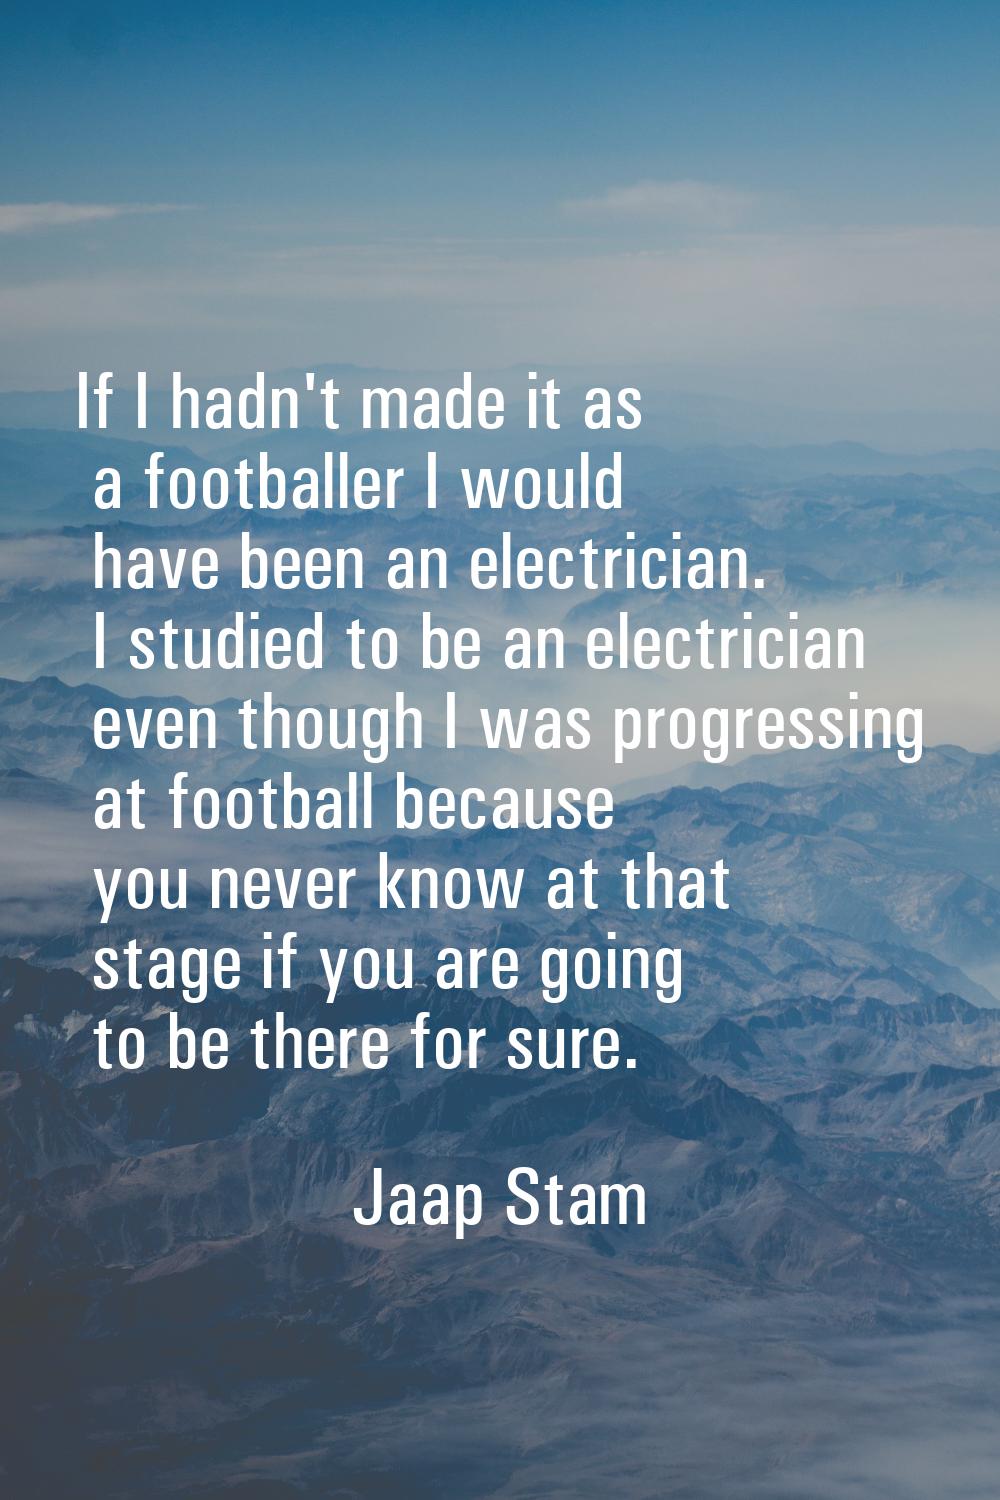 If I hadn't made it as a footballer I would have been an electrician. I studied to be an electricia